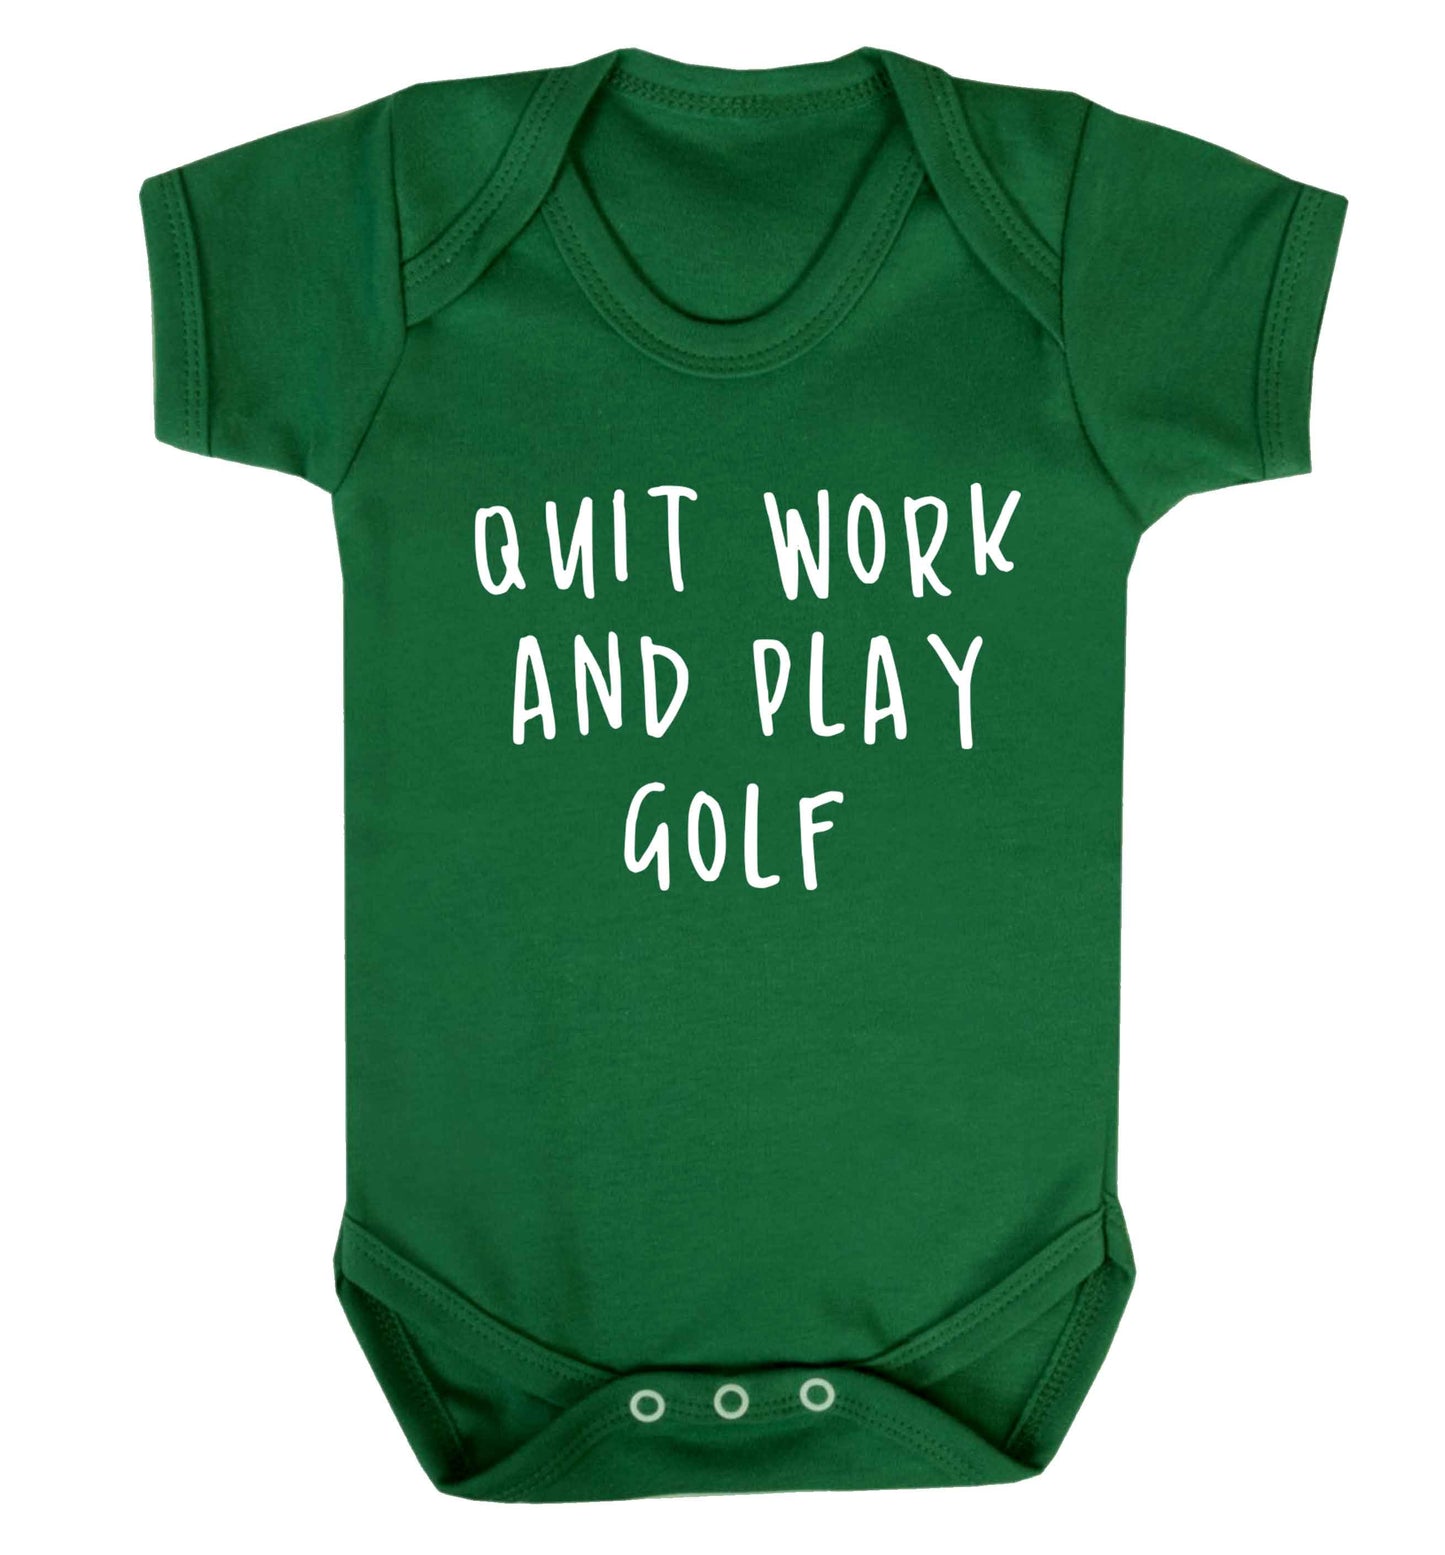 Quit work and play golf Baby Vest green 18-24 months